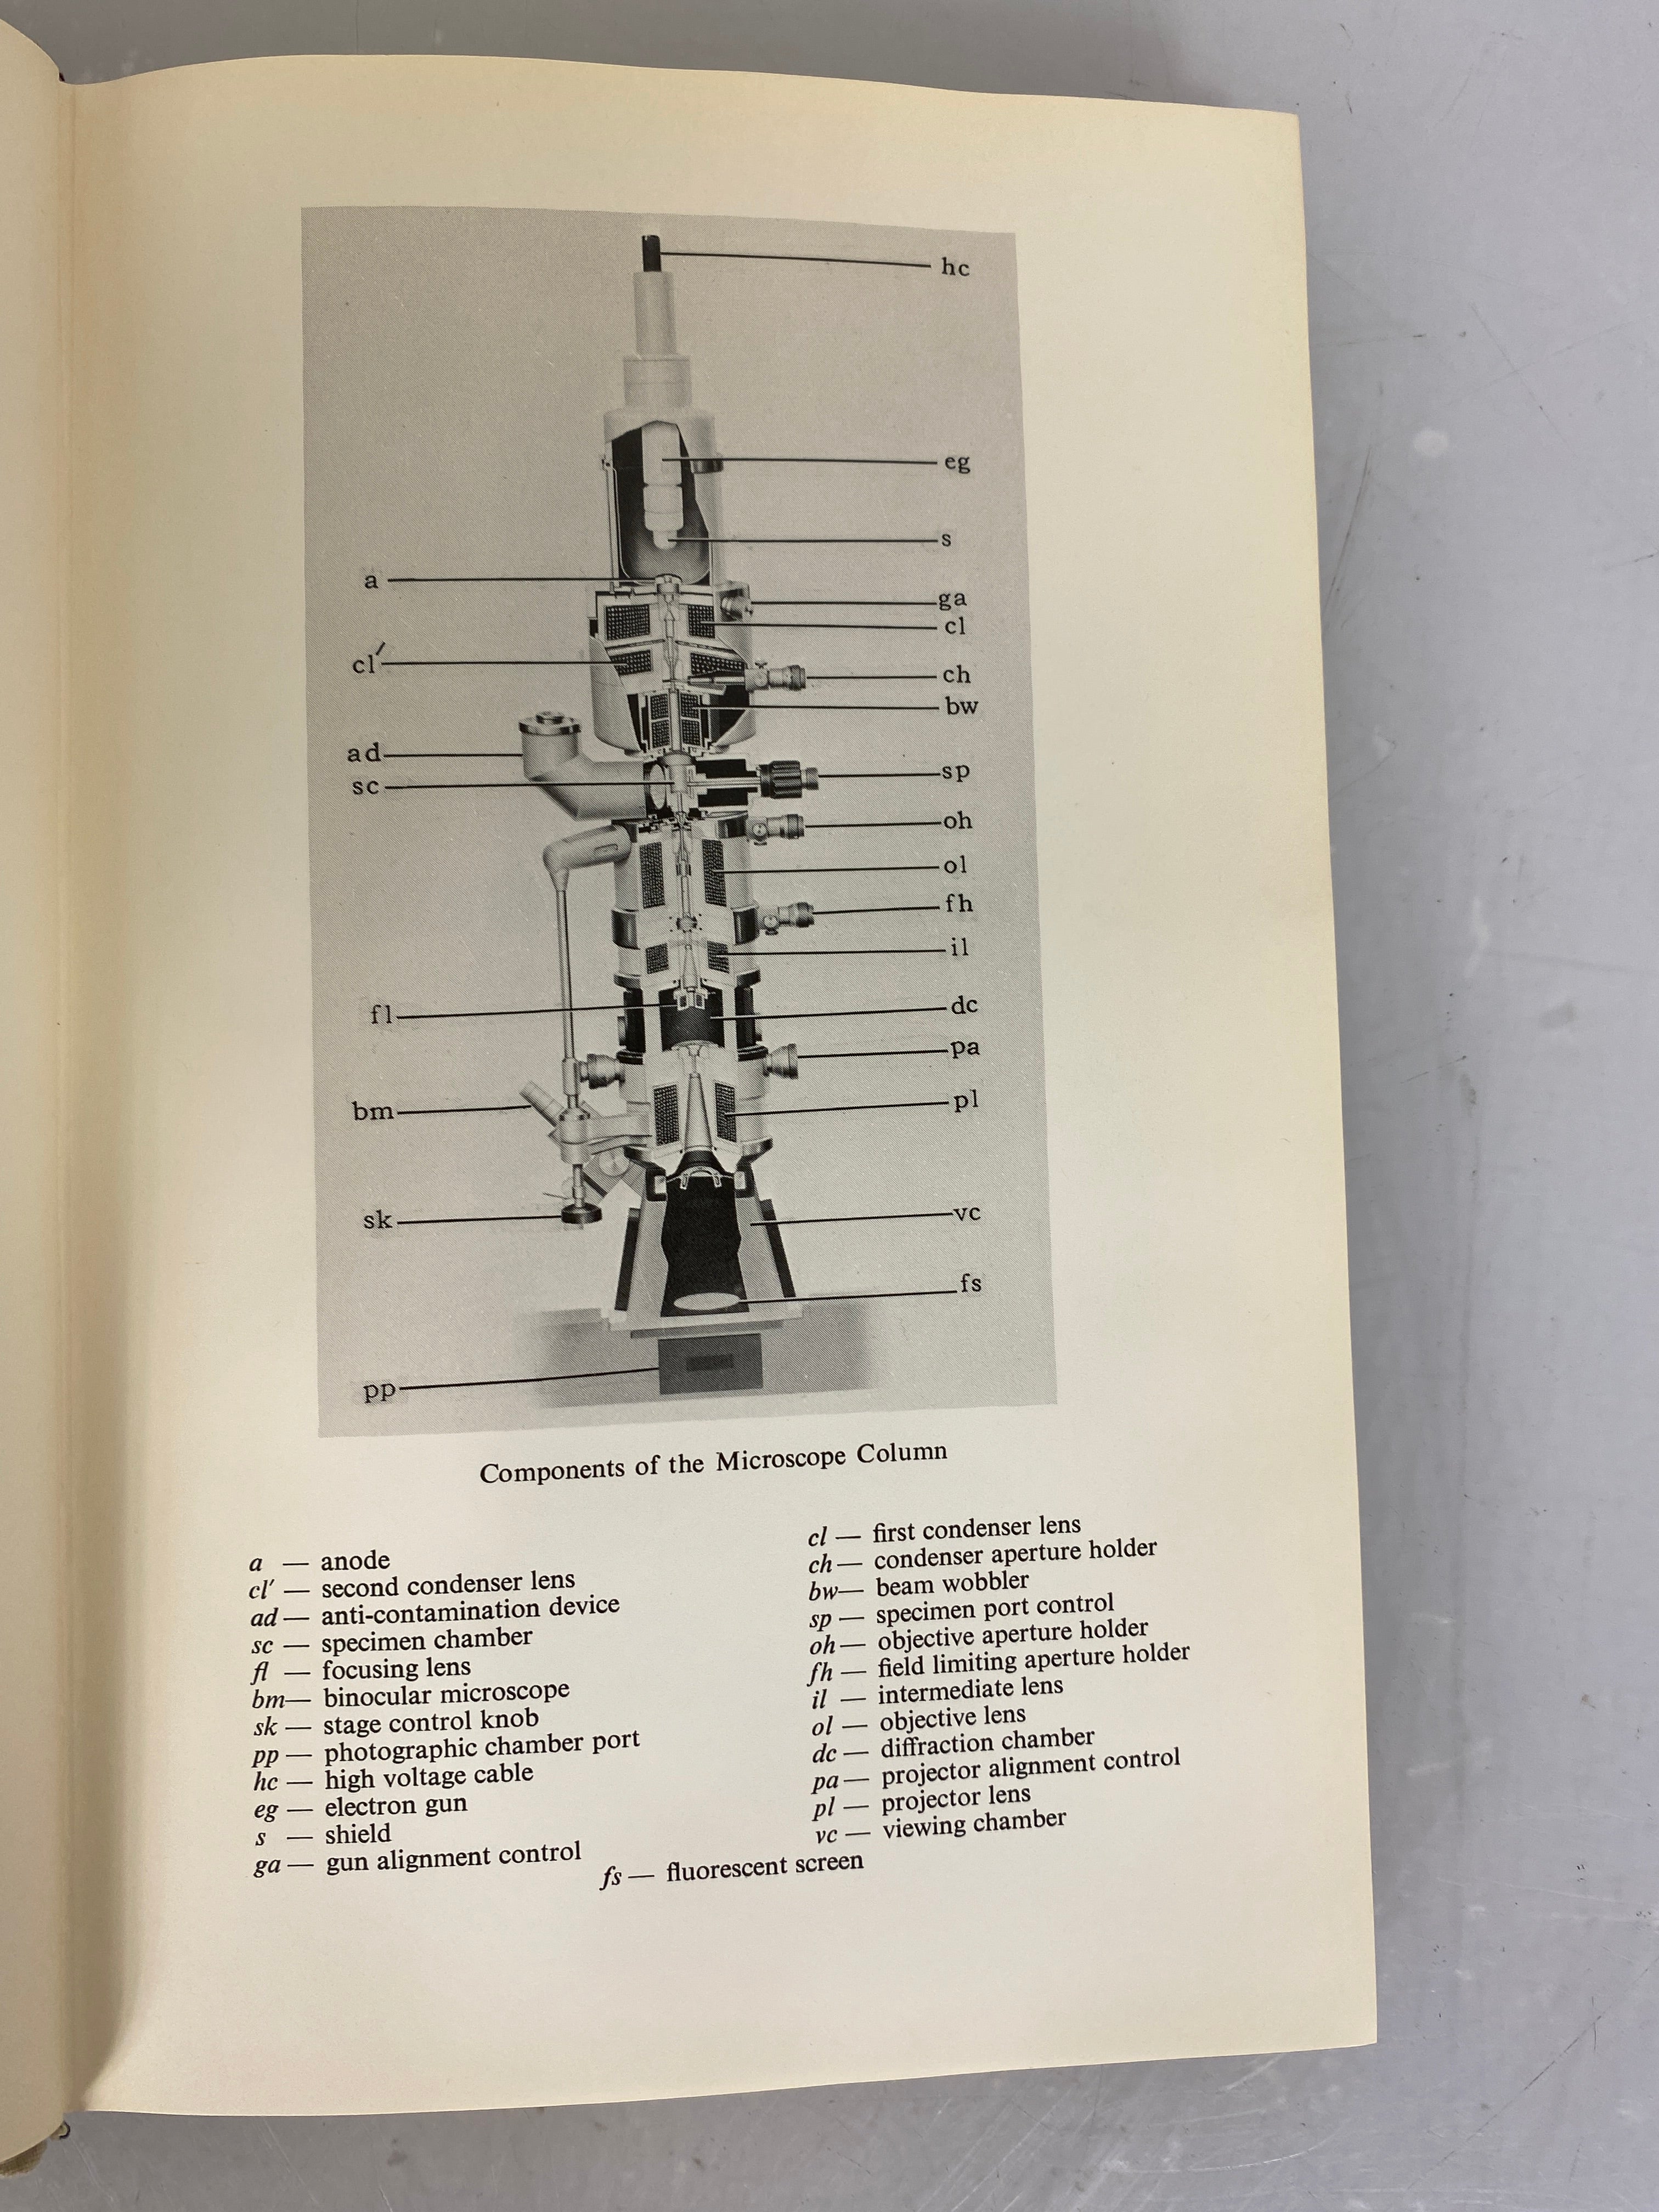 Introduction to Electron Microscopy by Saul Wischnitzer Second Edition 1970 HC